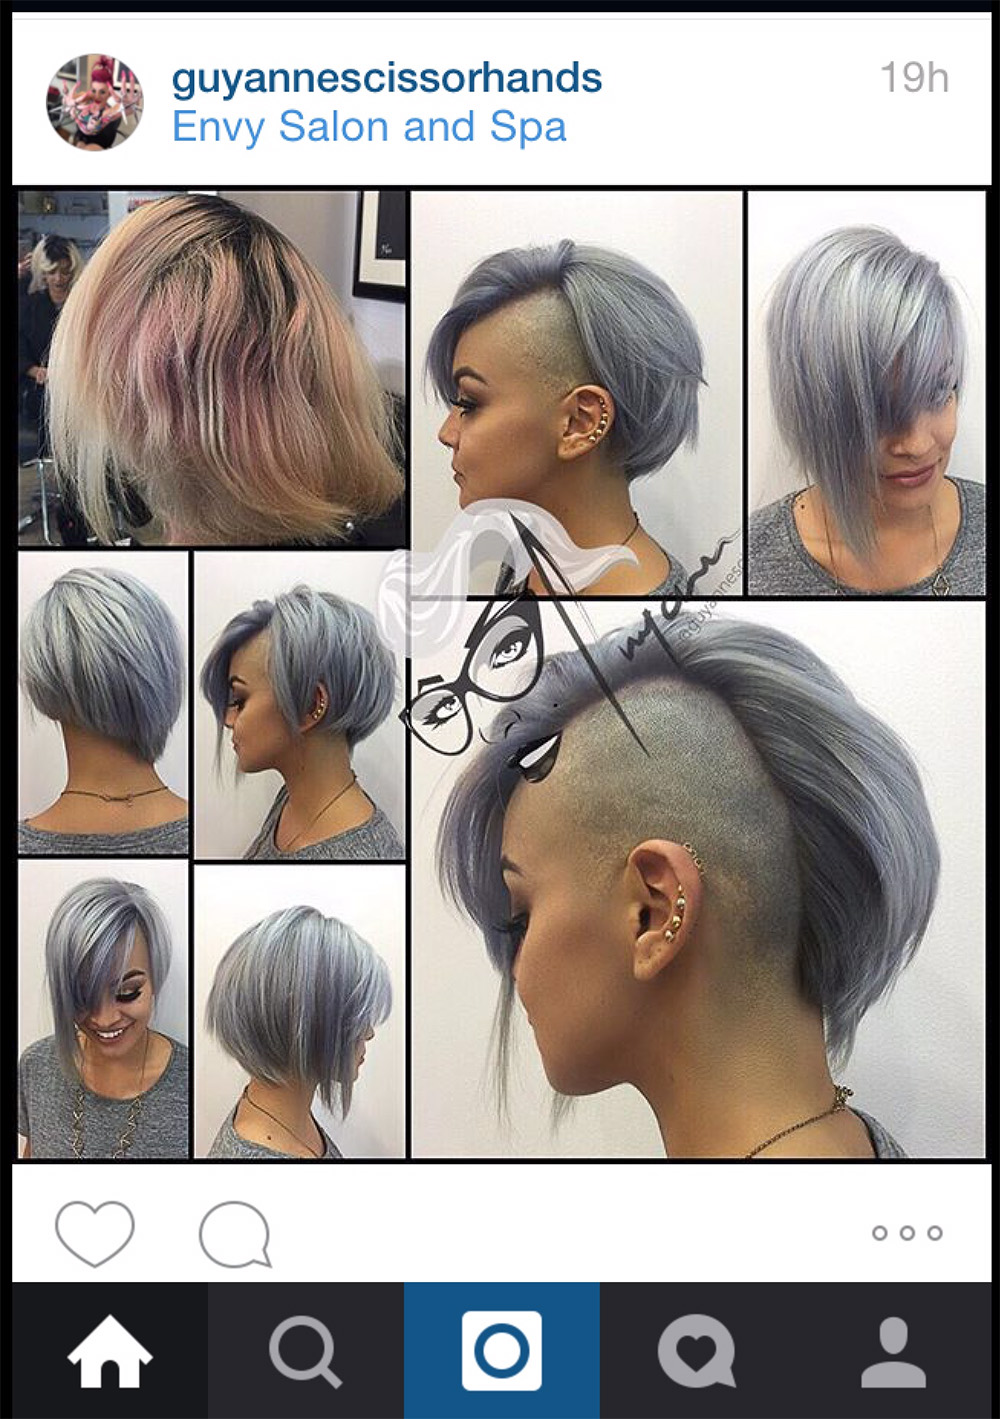 Screen cap of Guyanne Scissorhands' Instagram showing a series of photos of a client with hair dyed silver and cut in a dramatic, asymmetric, angular undercut